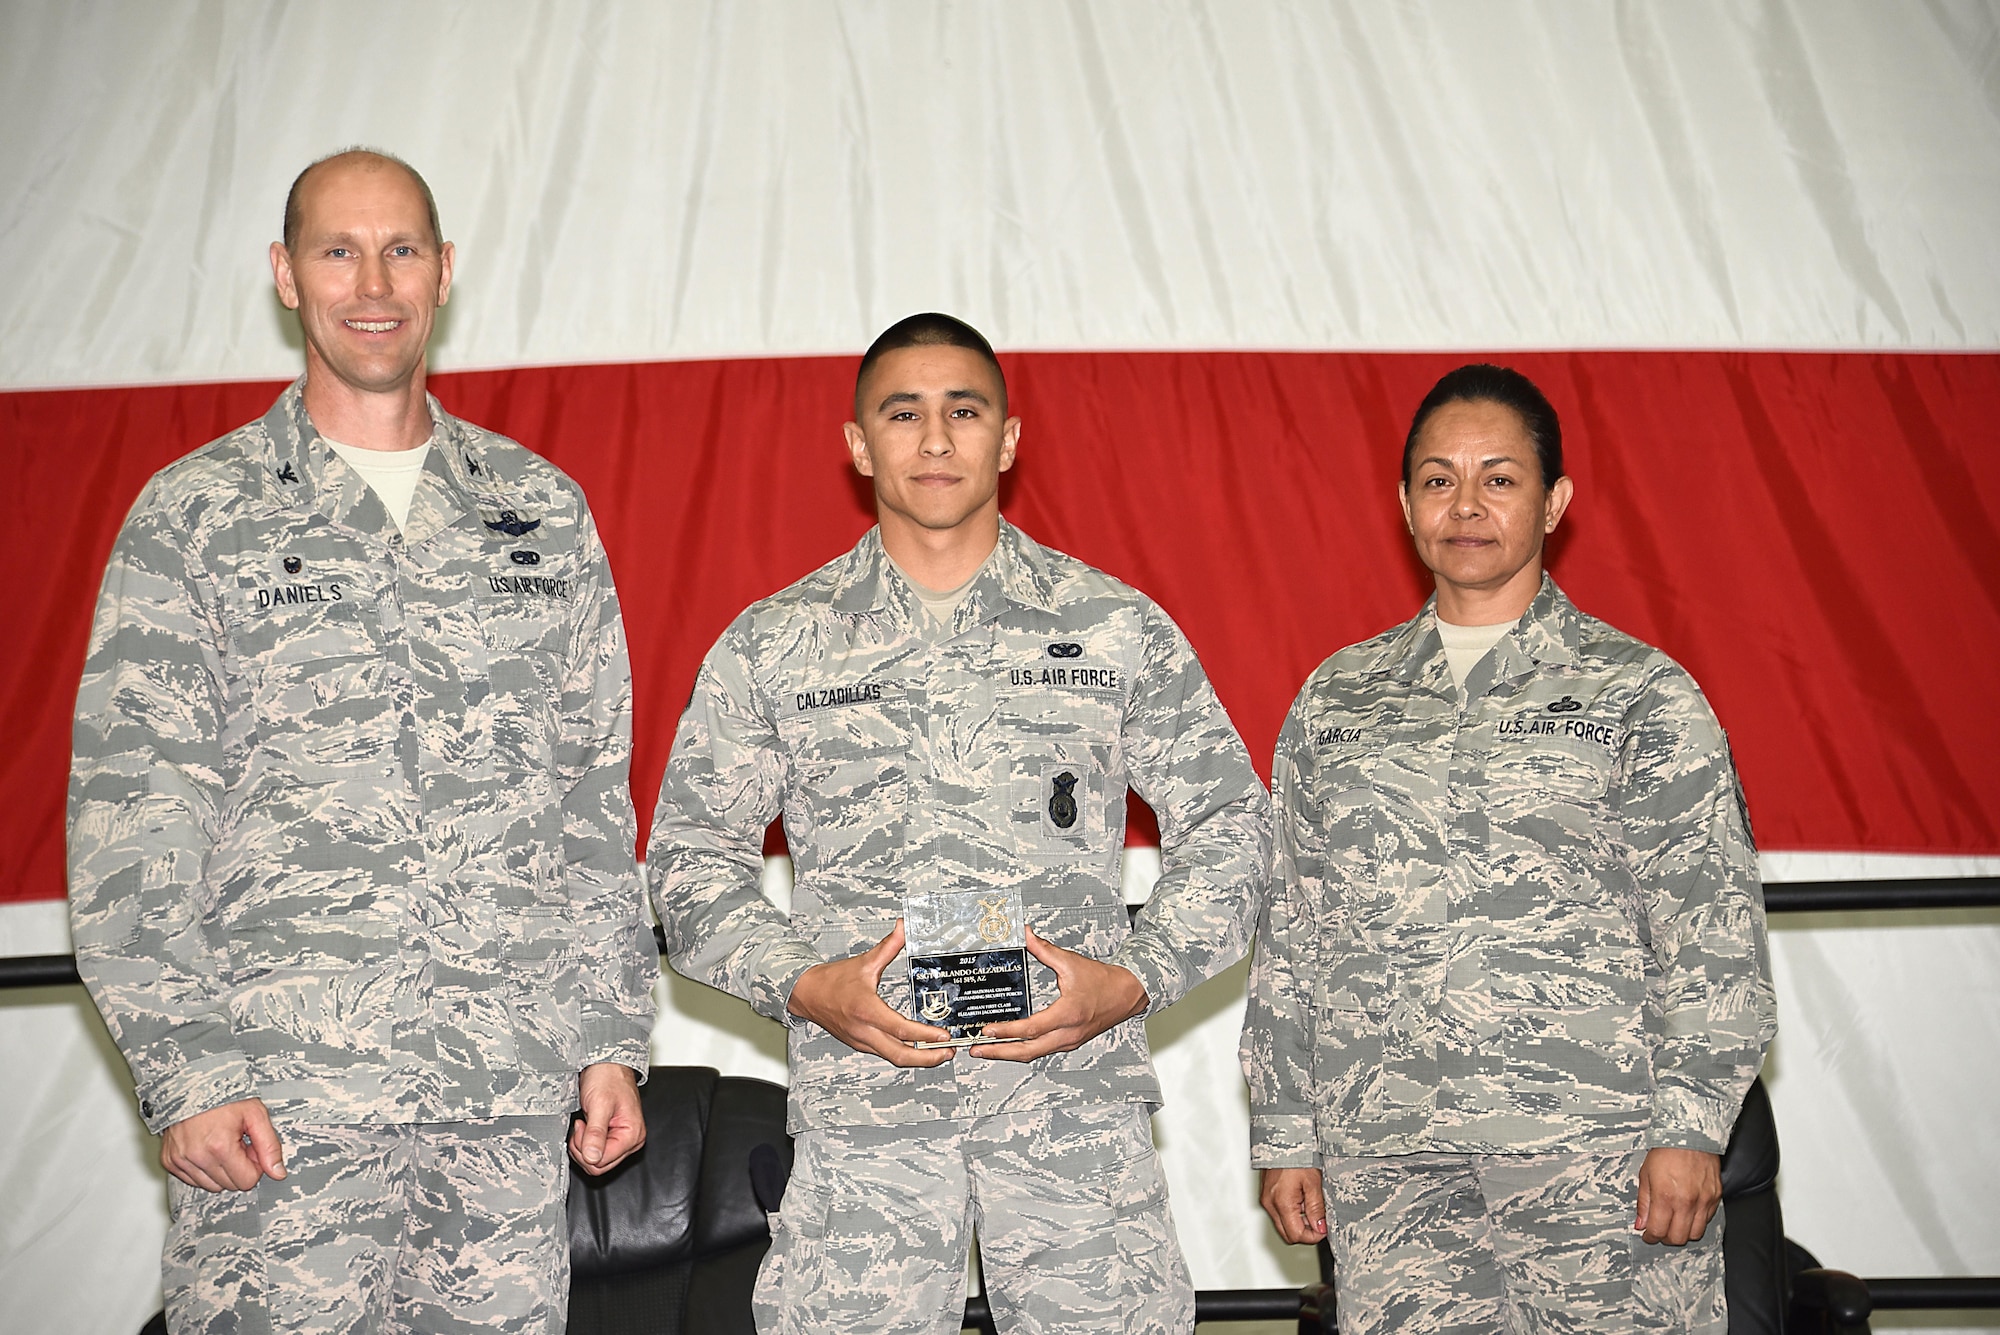 The Airman First Class Elizabeth N. Jacobson Award recipient, Staff Sgt. Orlando Calzadillas, 161st Security Forces Squadron, was recognized at the 161st Air Refueling Wing annual awards ceremony April 2, 2017, Goldwater Air National Guard Base. Col. Troy Daniels, 161st Air Refueling Wing commander and Chief Master Sgt. Martha Garcia, 161st Air Refueling Wing command chief presented. Calzadillas with the award. (U. S. Air National Guard photo by Staff Sgt. Wesley Parrell)